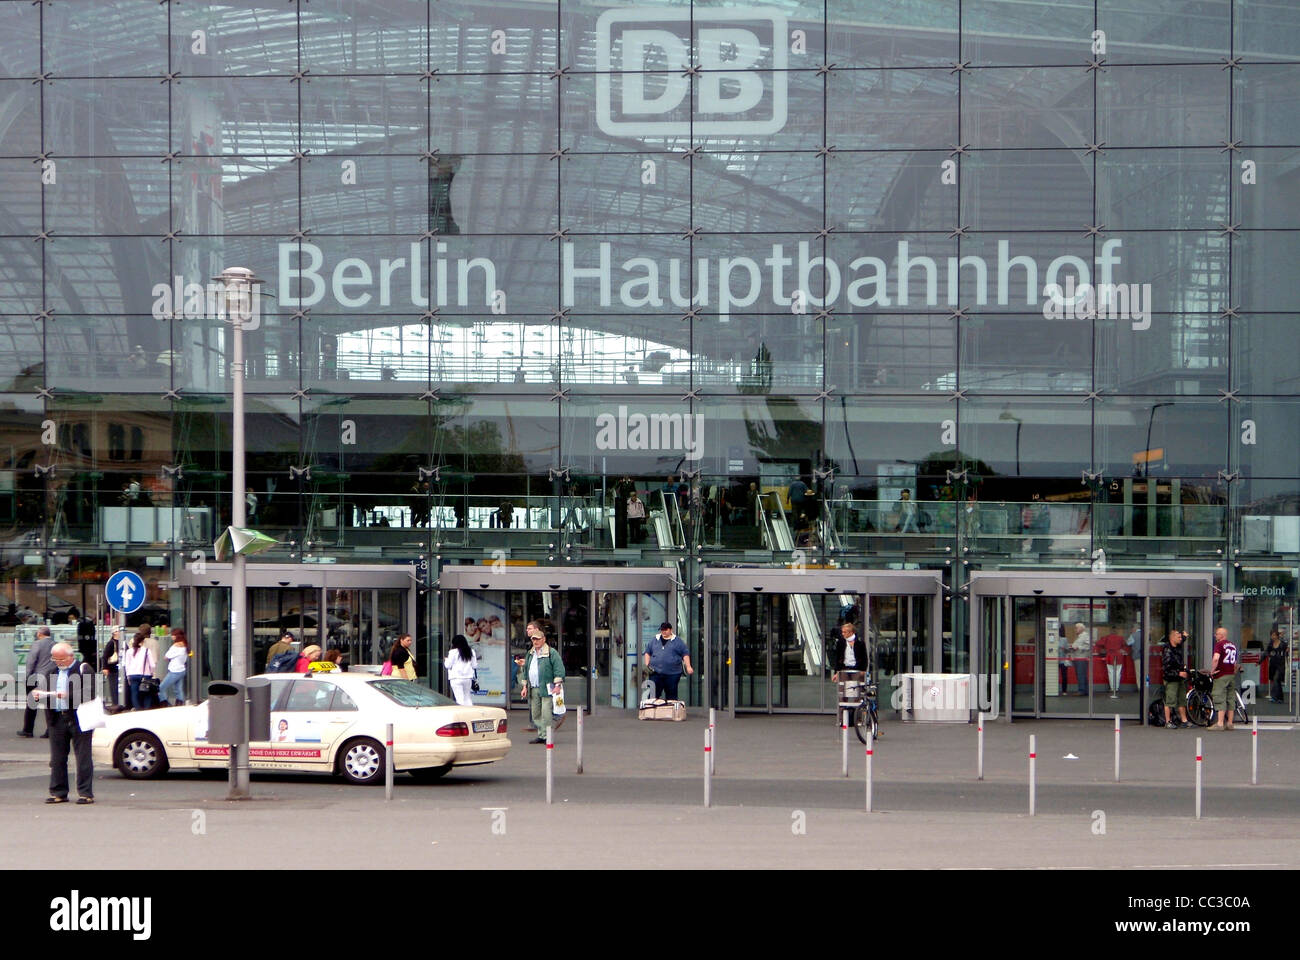 Central train station of Berlin. Stock Photo